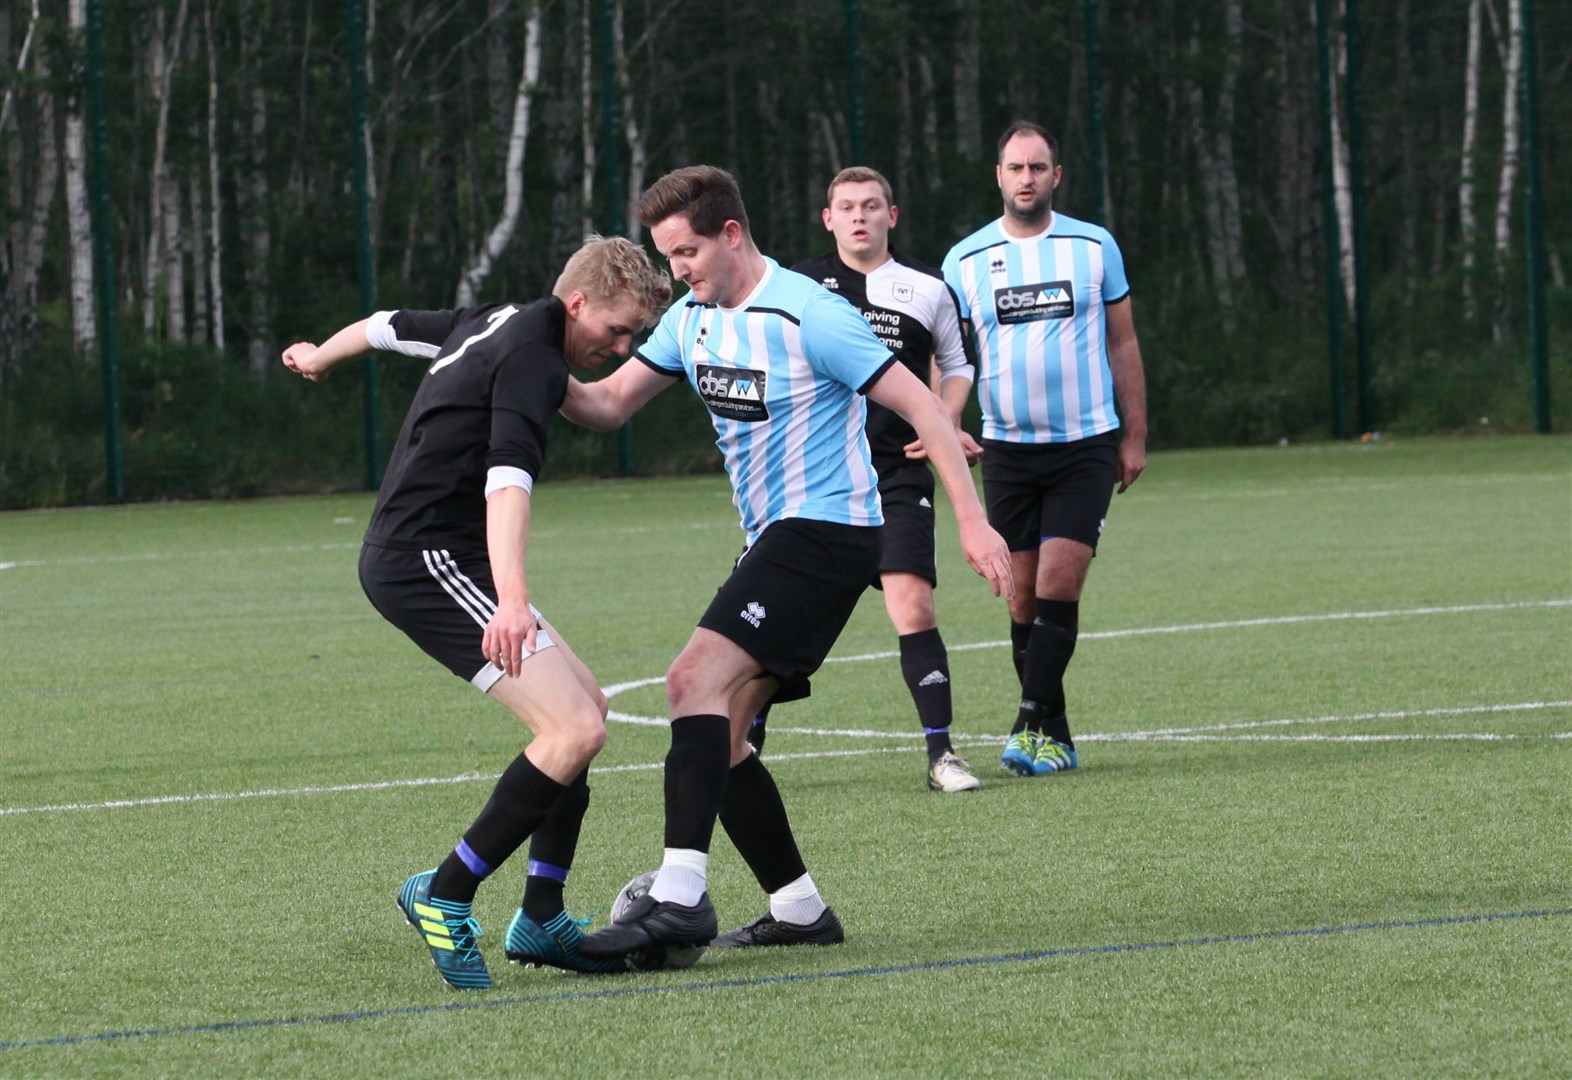 Boat of Garten and Aviemore Thsitle were involved in a 10 goal thriller last night. read all the latest league action report in tomorrow's Strathy.